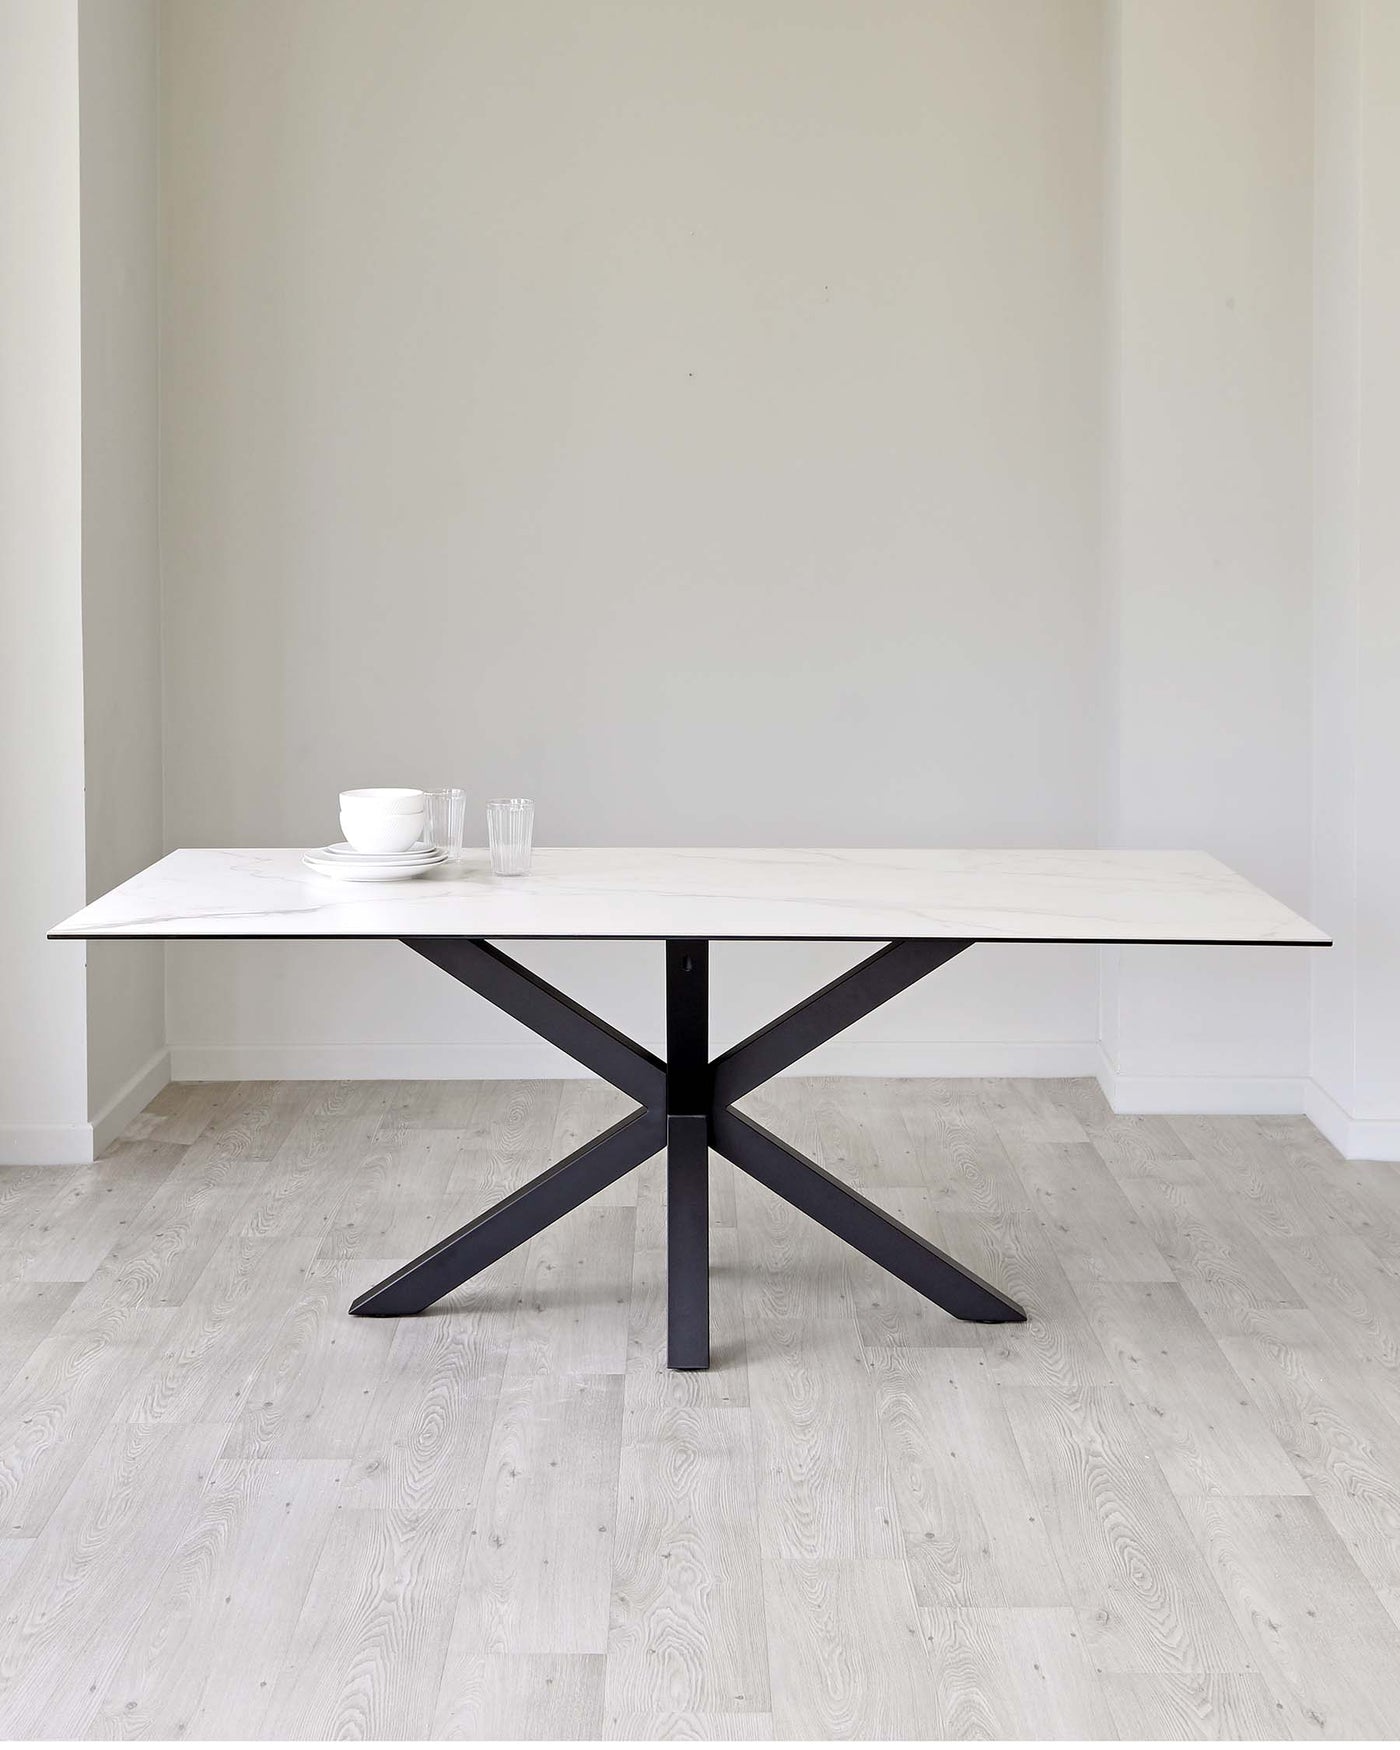 Modern minimalist dining table with a white marble top and a black criss-cross steel base, set in a room with light wooden flooring and pale grey walls.